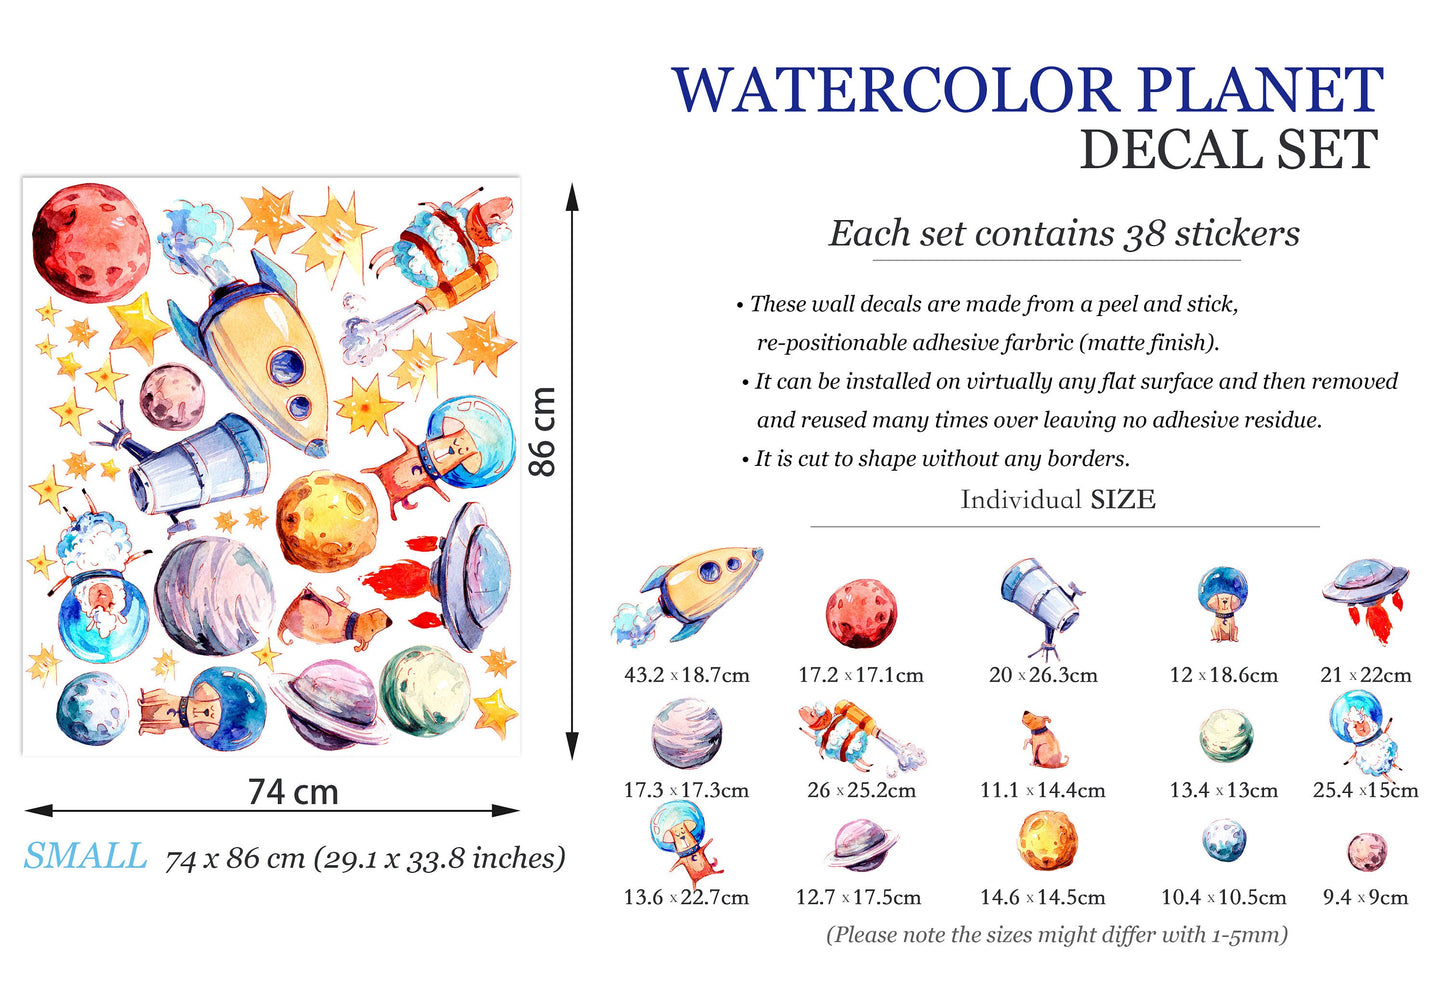 Galactic Adventures: Solar System & Cosmic Critters Wall Decal - BR051